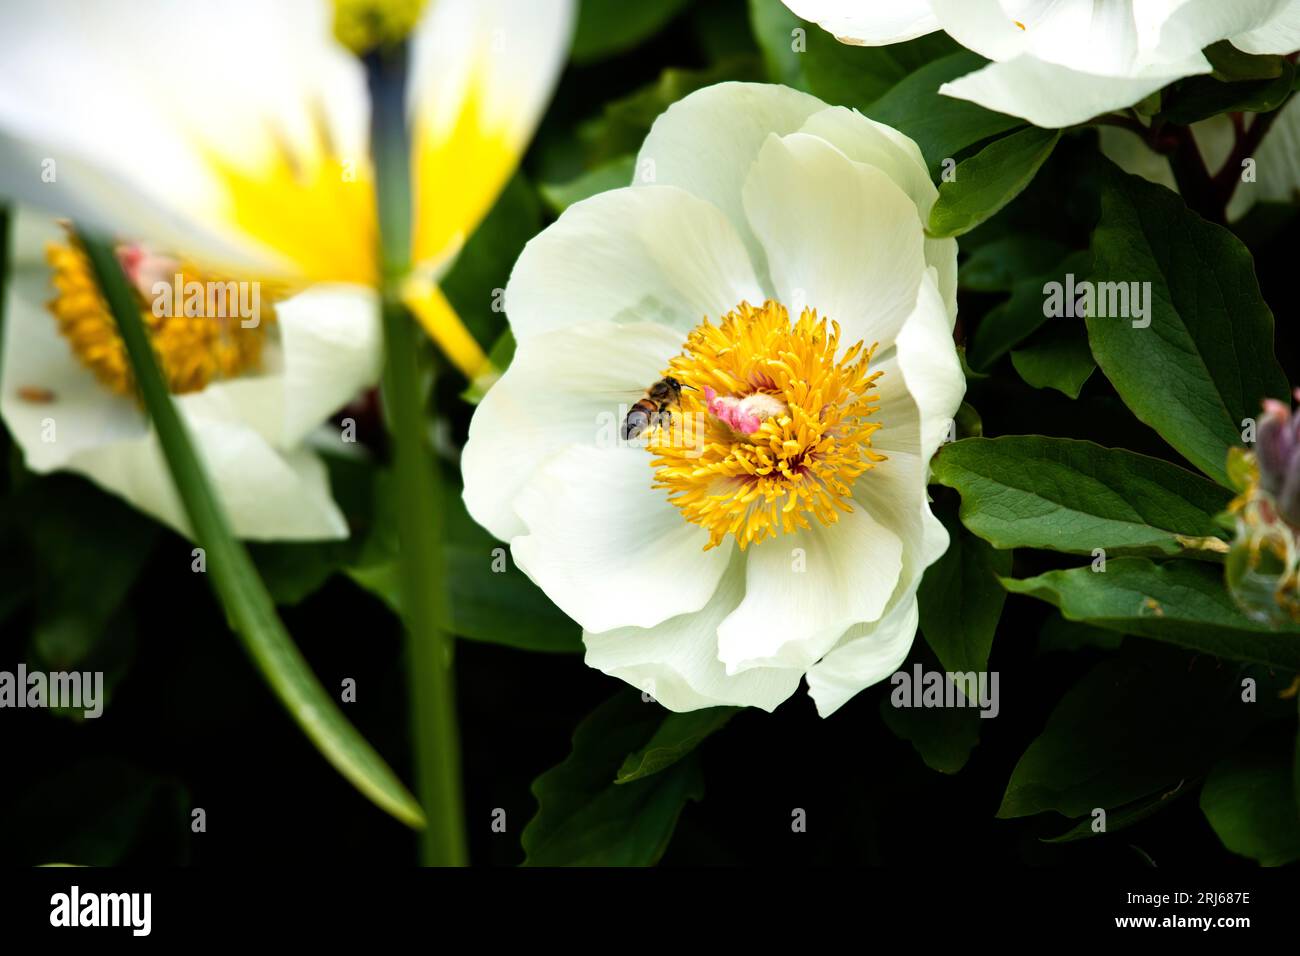 A white camellia flower with a bee visiting the centre. Stock Photo